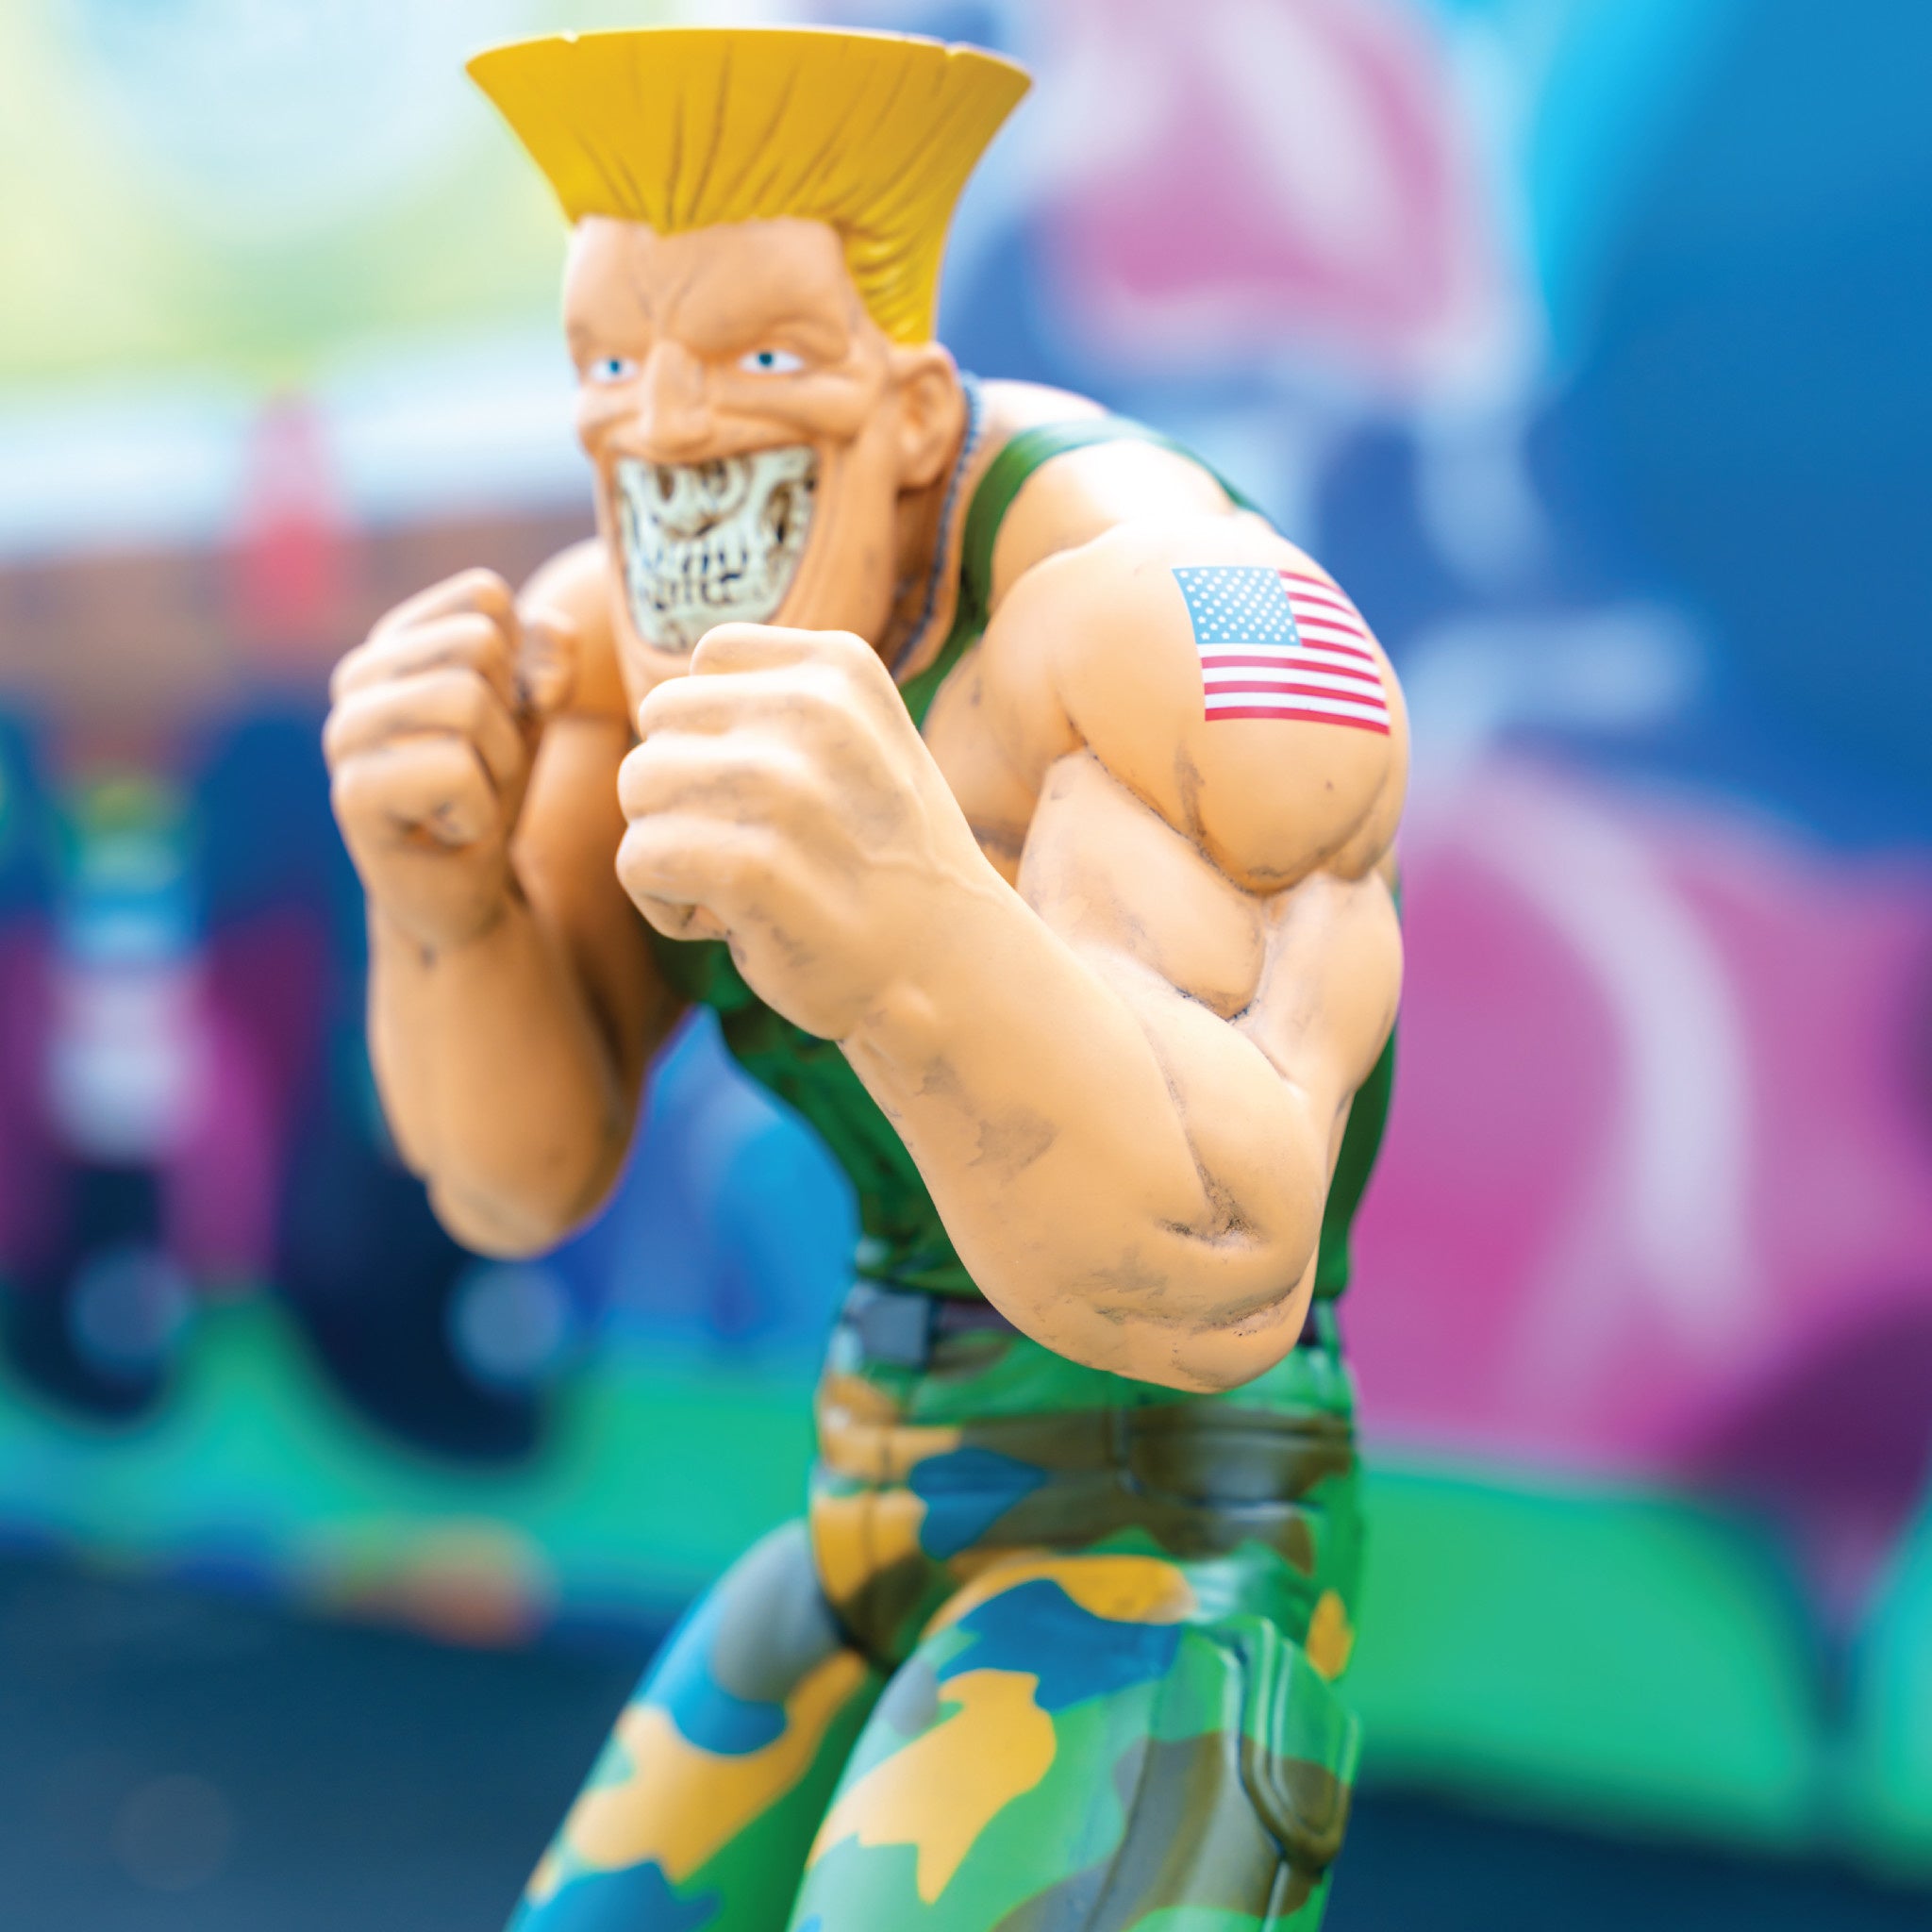 Ron English Street Fighter Guile Figure - Wynwood Walls Shop